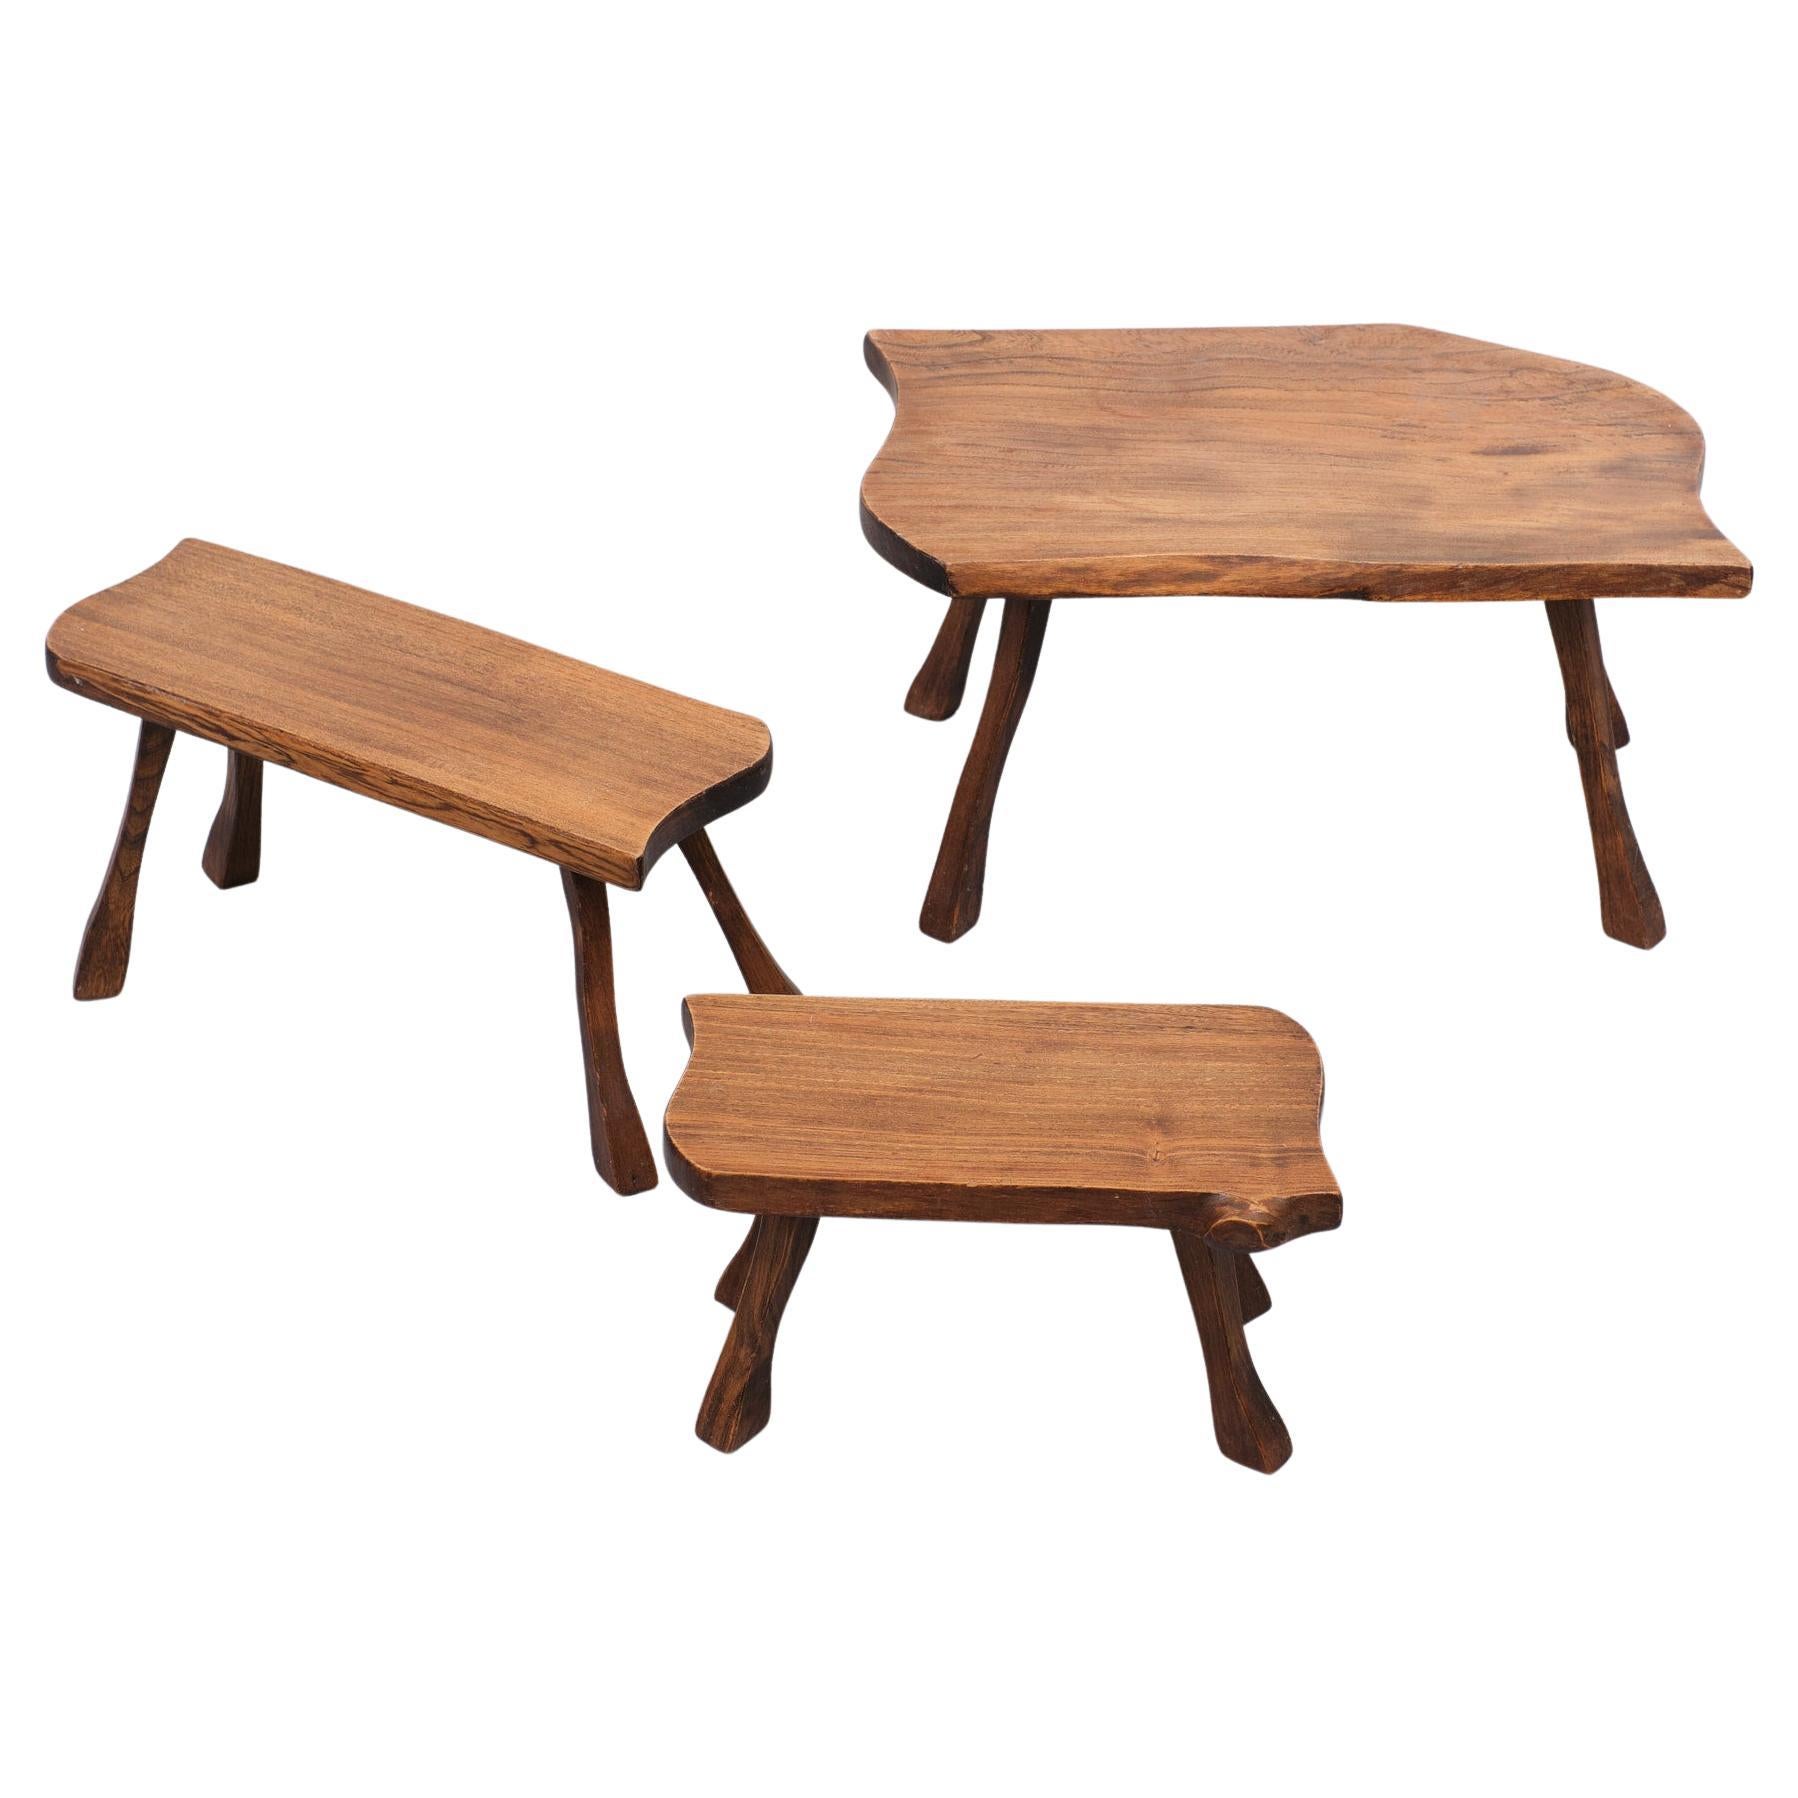 Mid-20th Century Tree Trunk Nesting Tables Hand Carved, 1960s For Sale